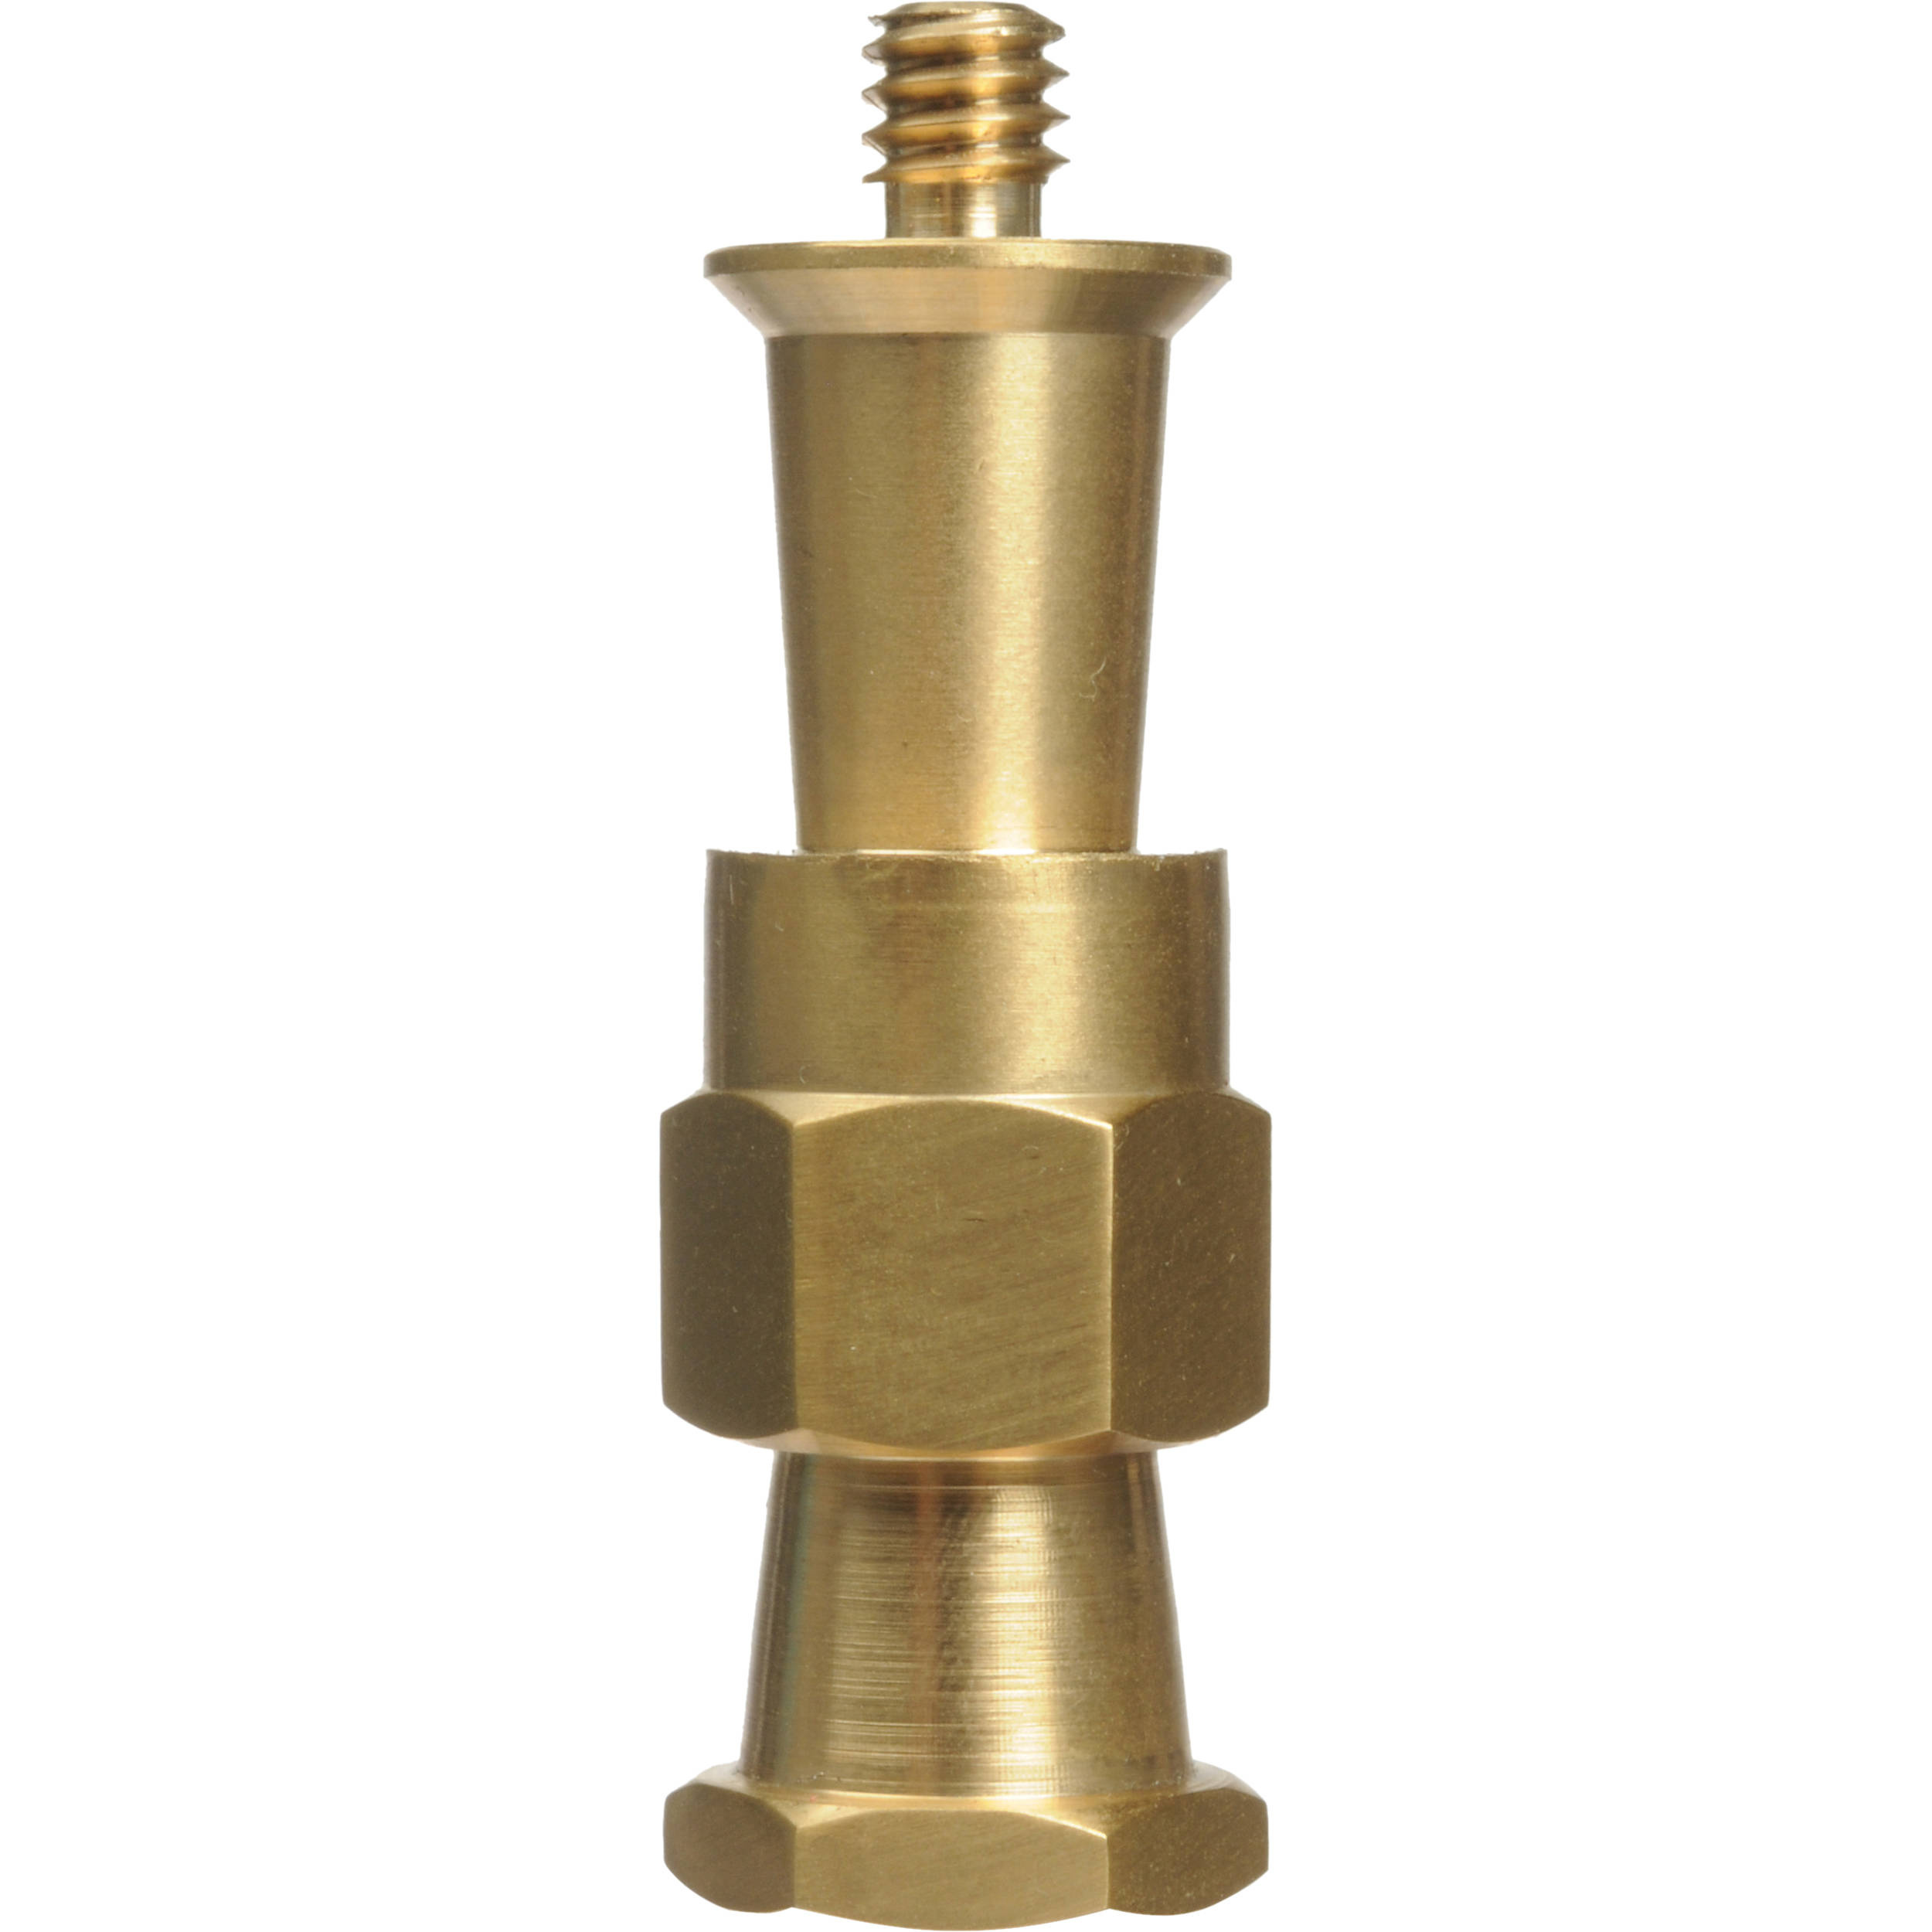 Impact Standard Stud for Super Clamp with 1/4"-20 Male Threads